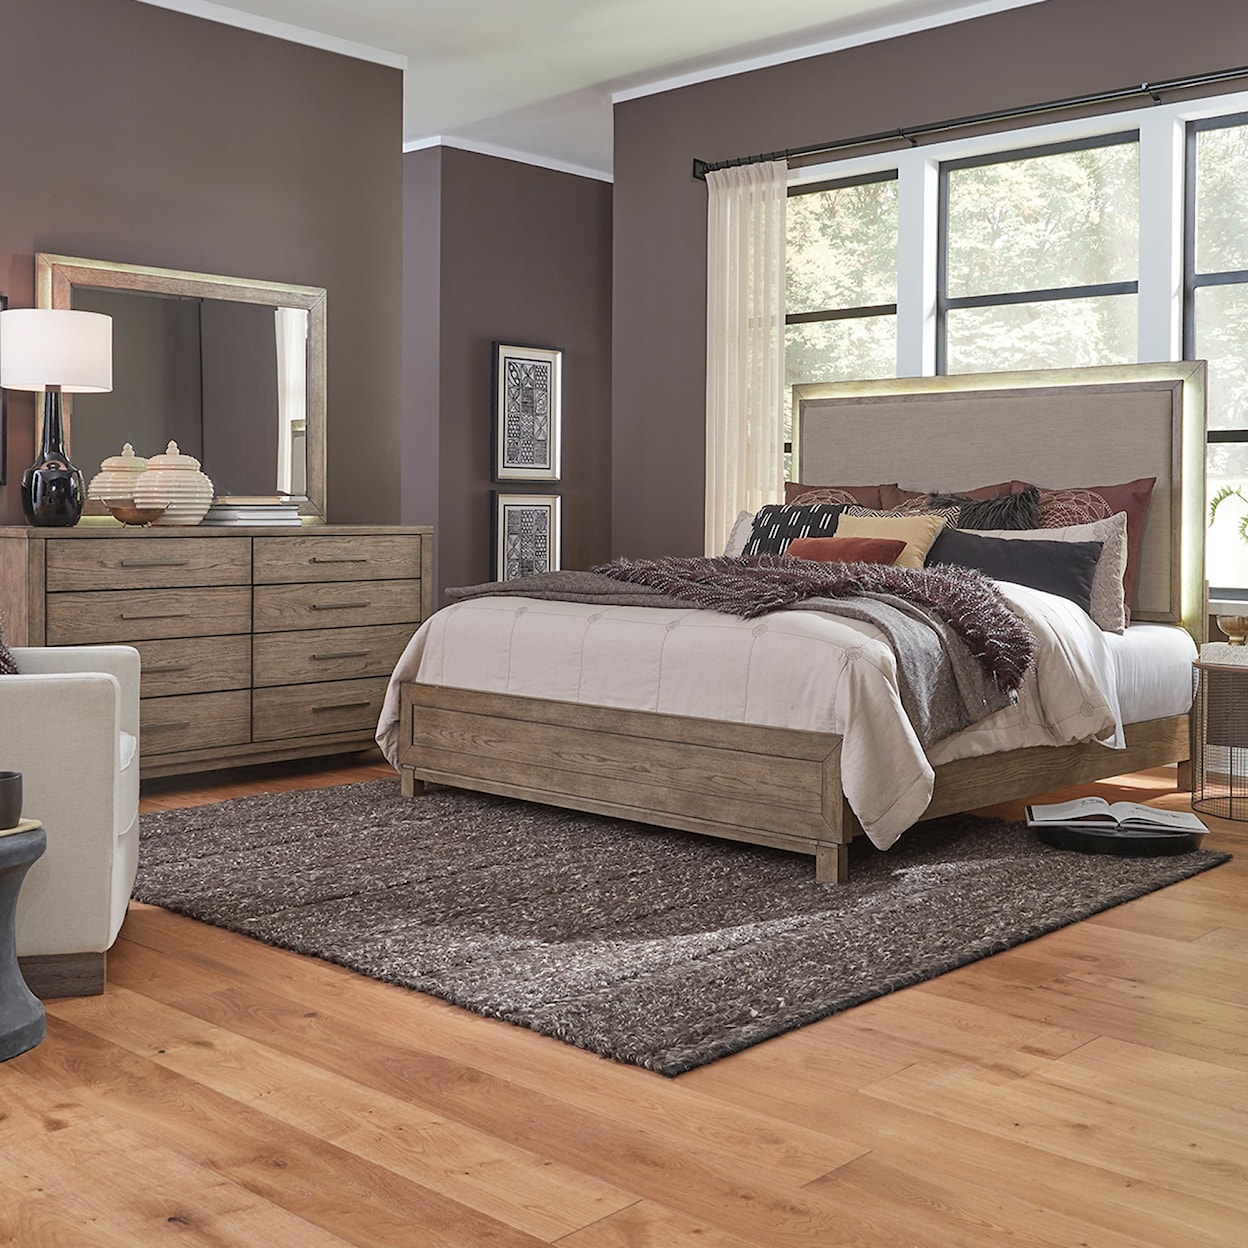 Liberty Furniture Canyon Road 3-Piece Queen Bedroom Group